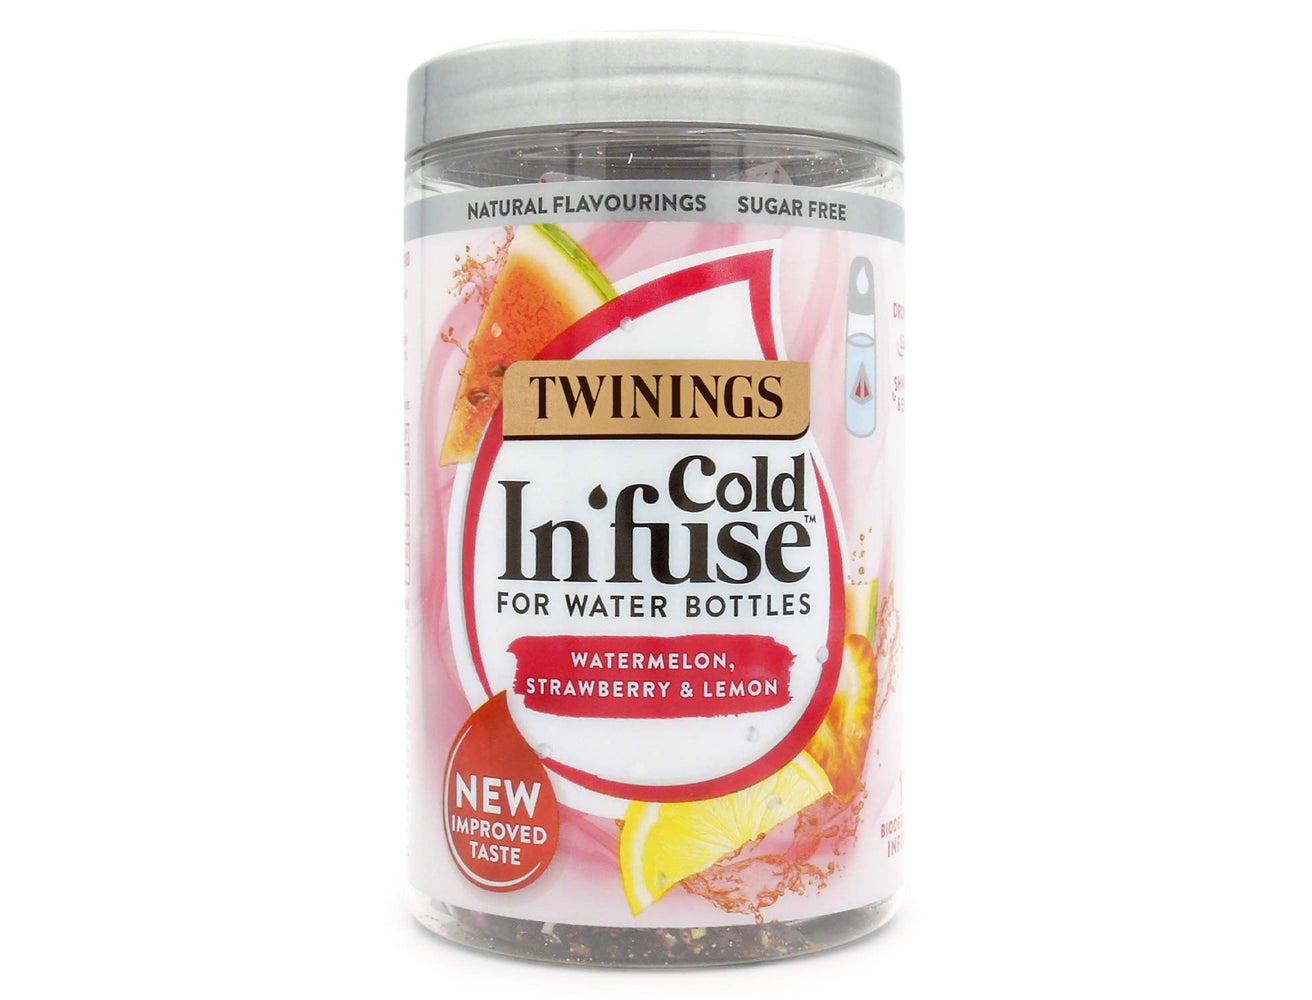 Twinings Cold In'Fuse Watermelon Strawberry And Mint 12 Tea Bag, 66 g 12 Count (Pack of 1)